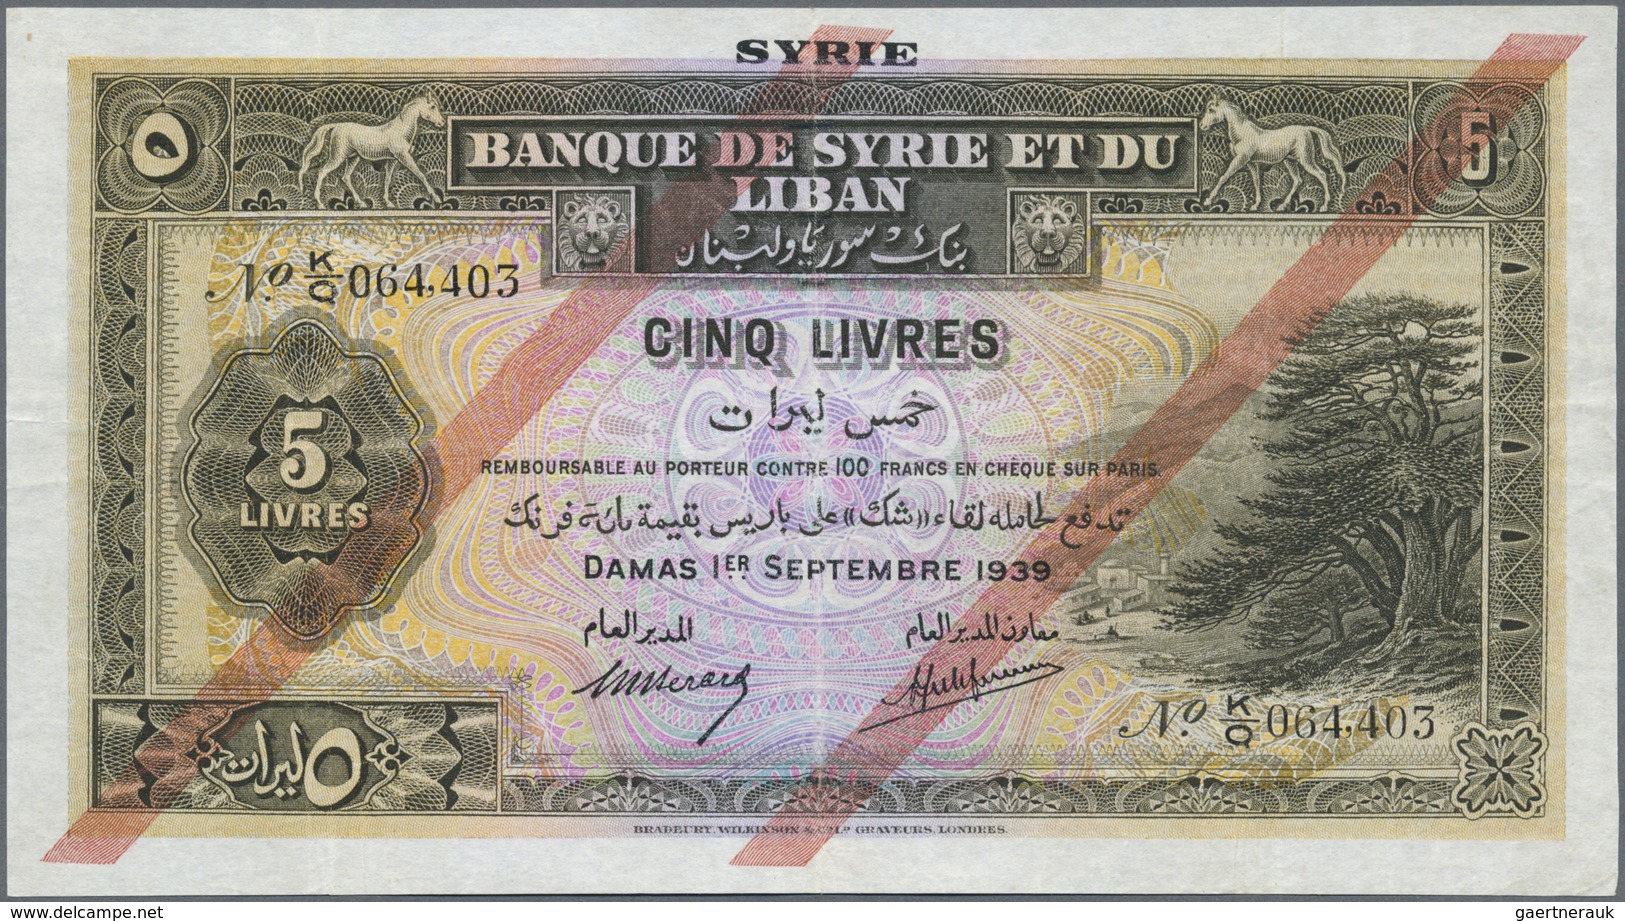 Syria / Syrien: Banque De Syrie Et Du Liban 5 Livres 1939, P.41c, Three Times Vertically Folded And - Syria